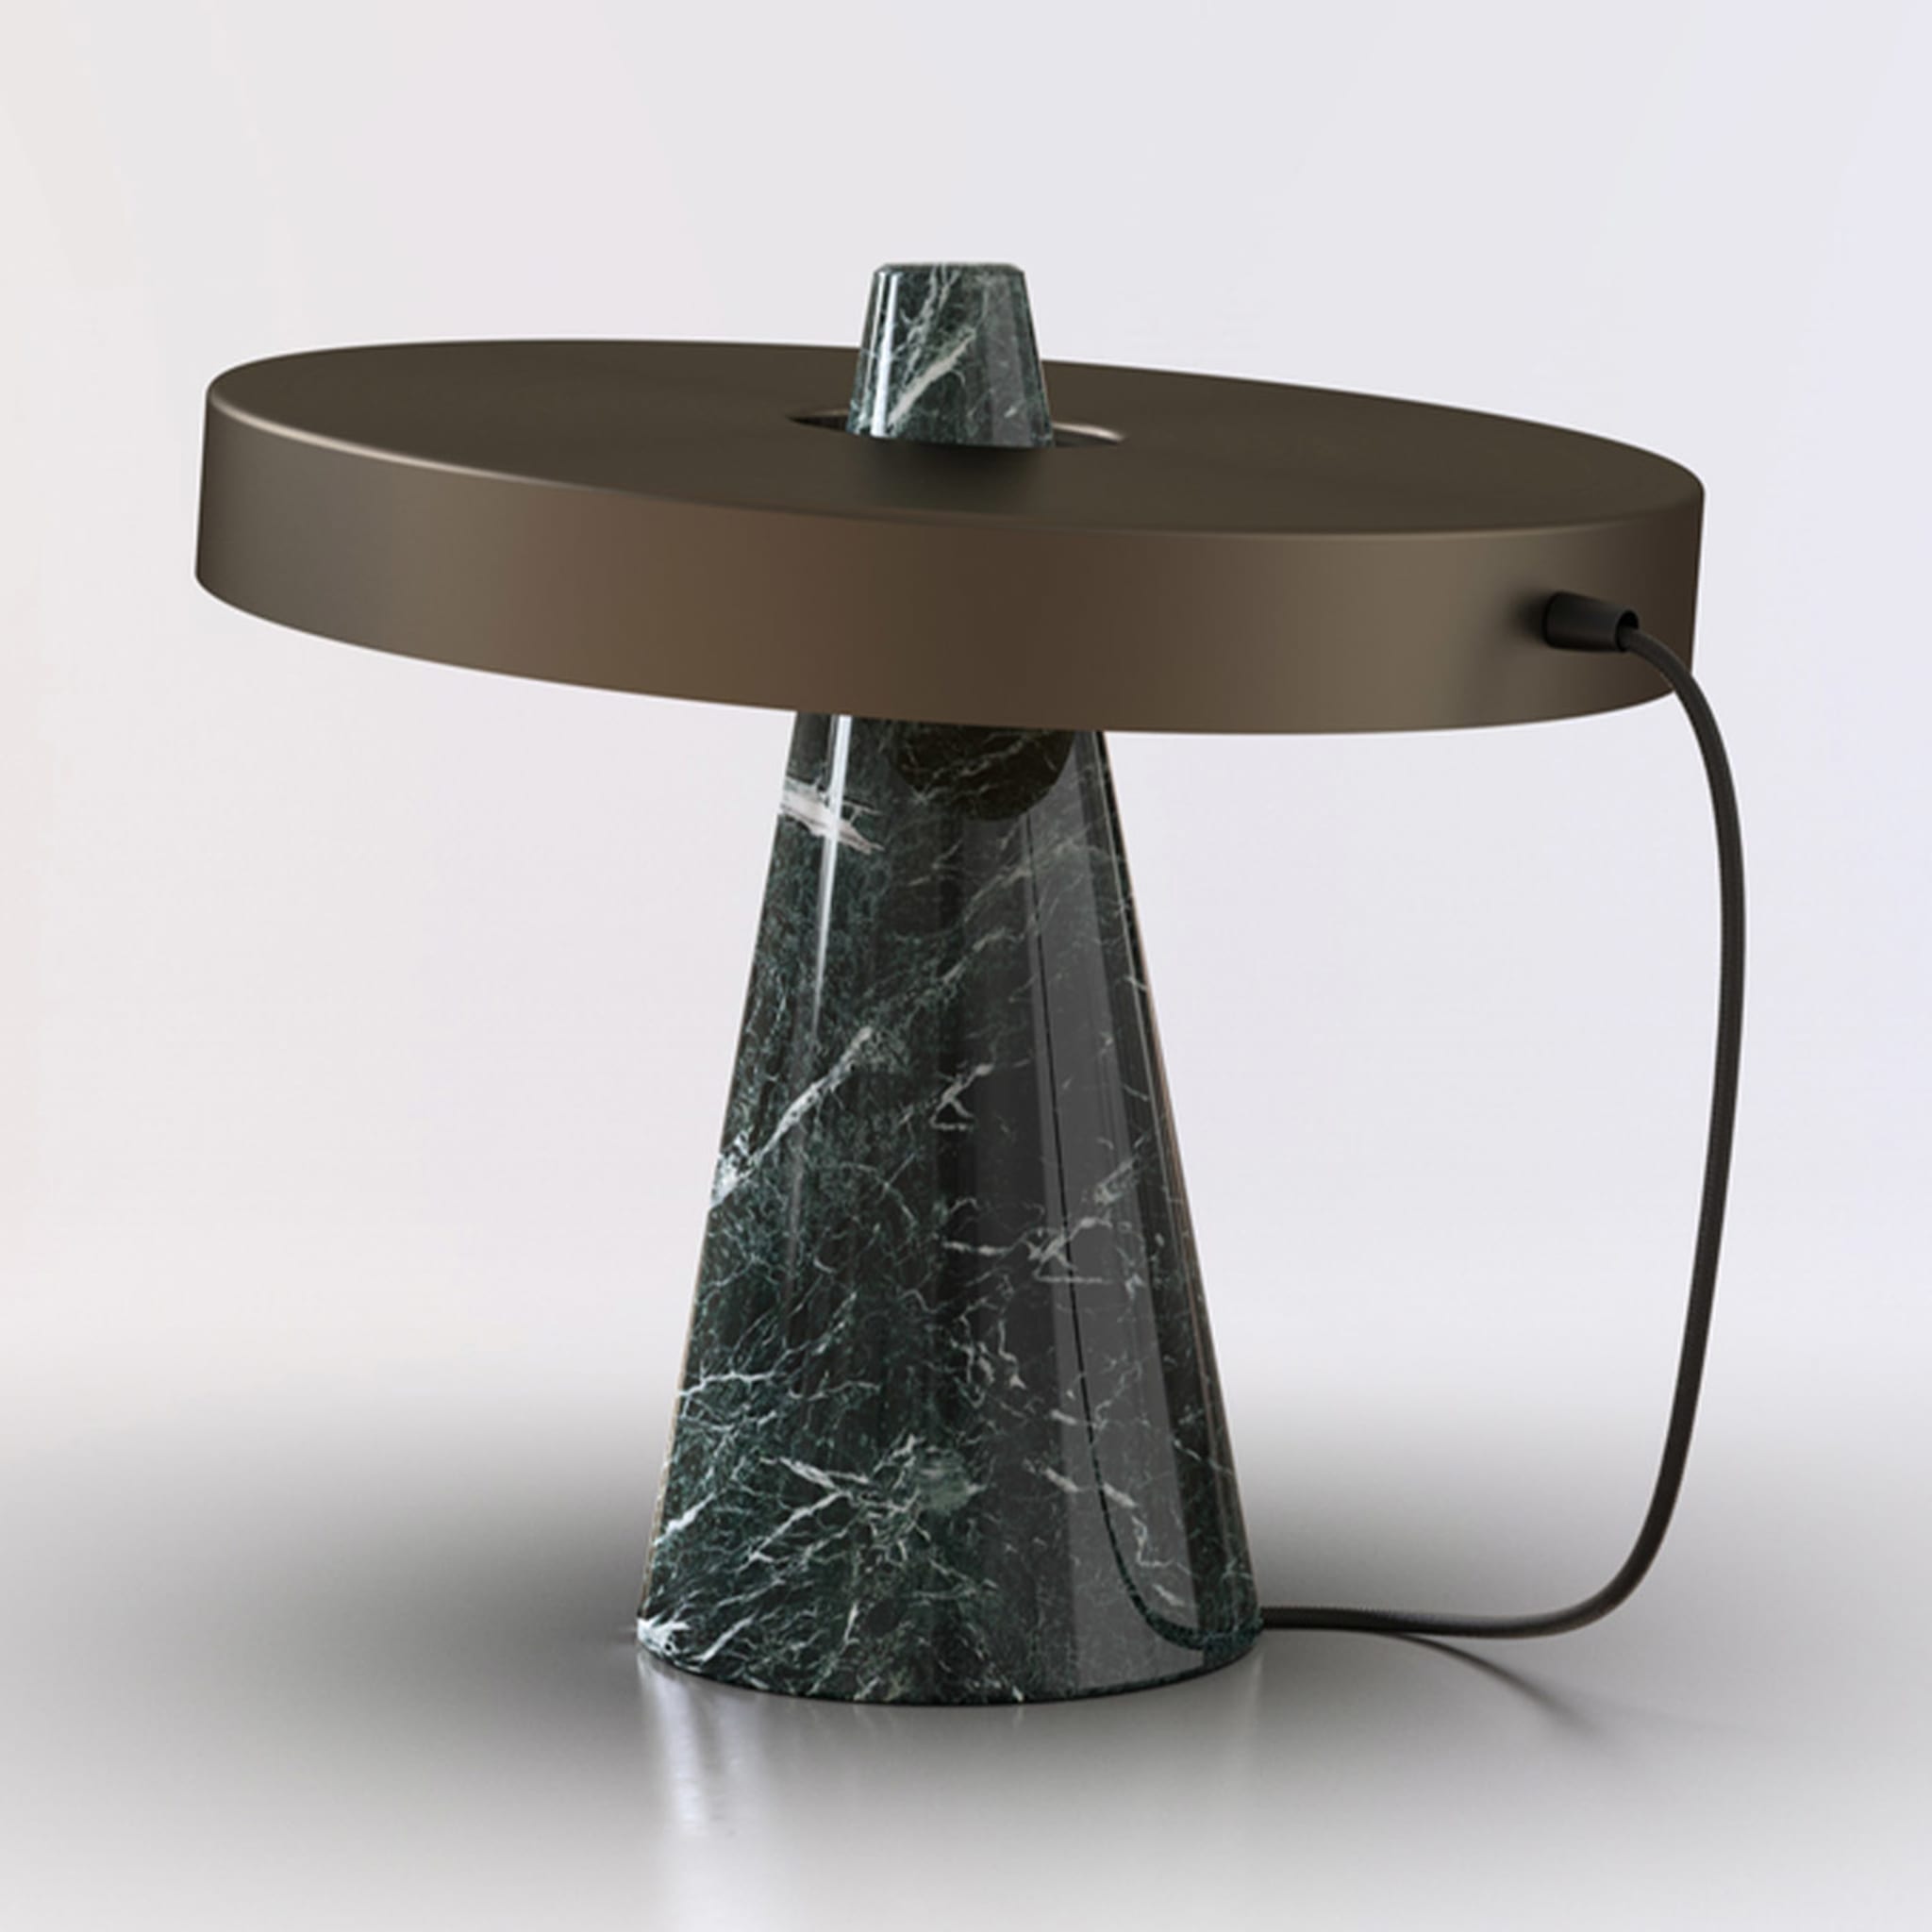 ED039 Green Stone and Bronze Table Lamp - Alternative view 1